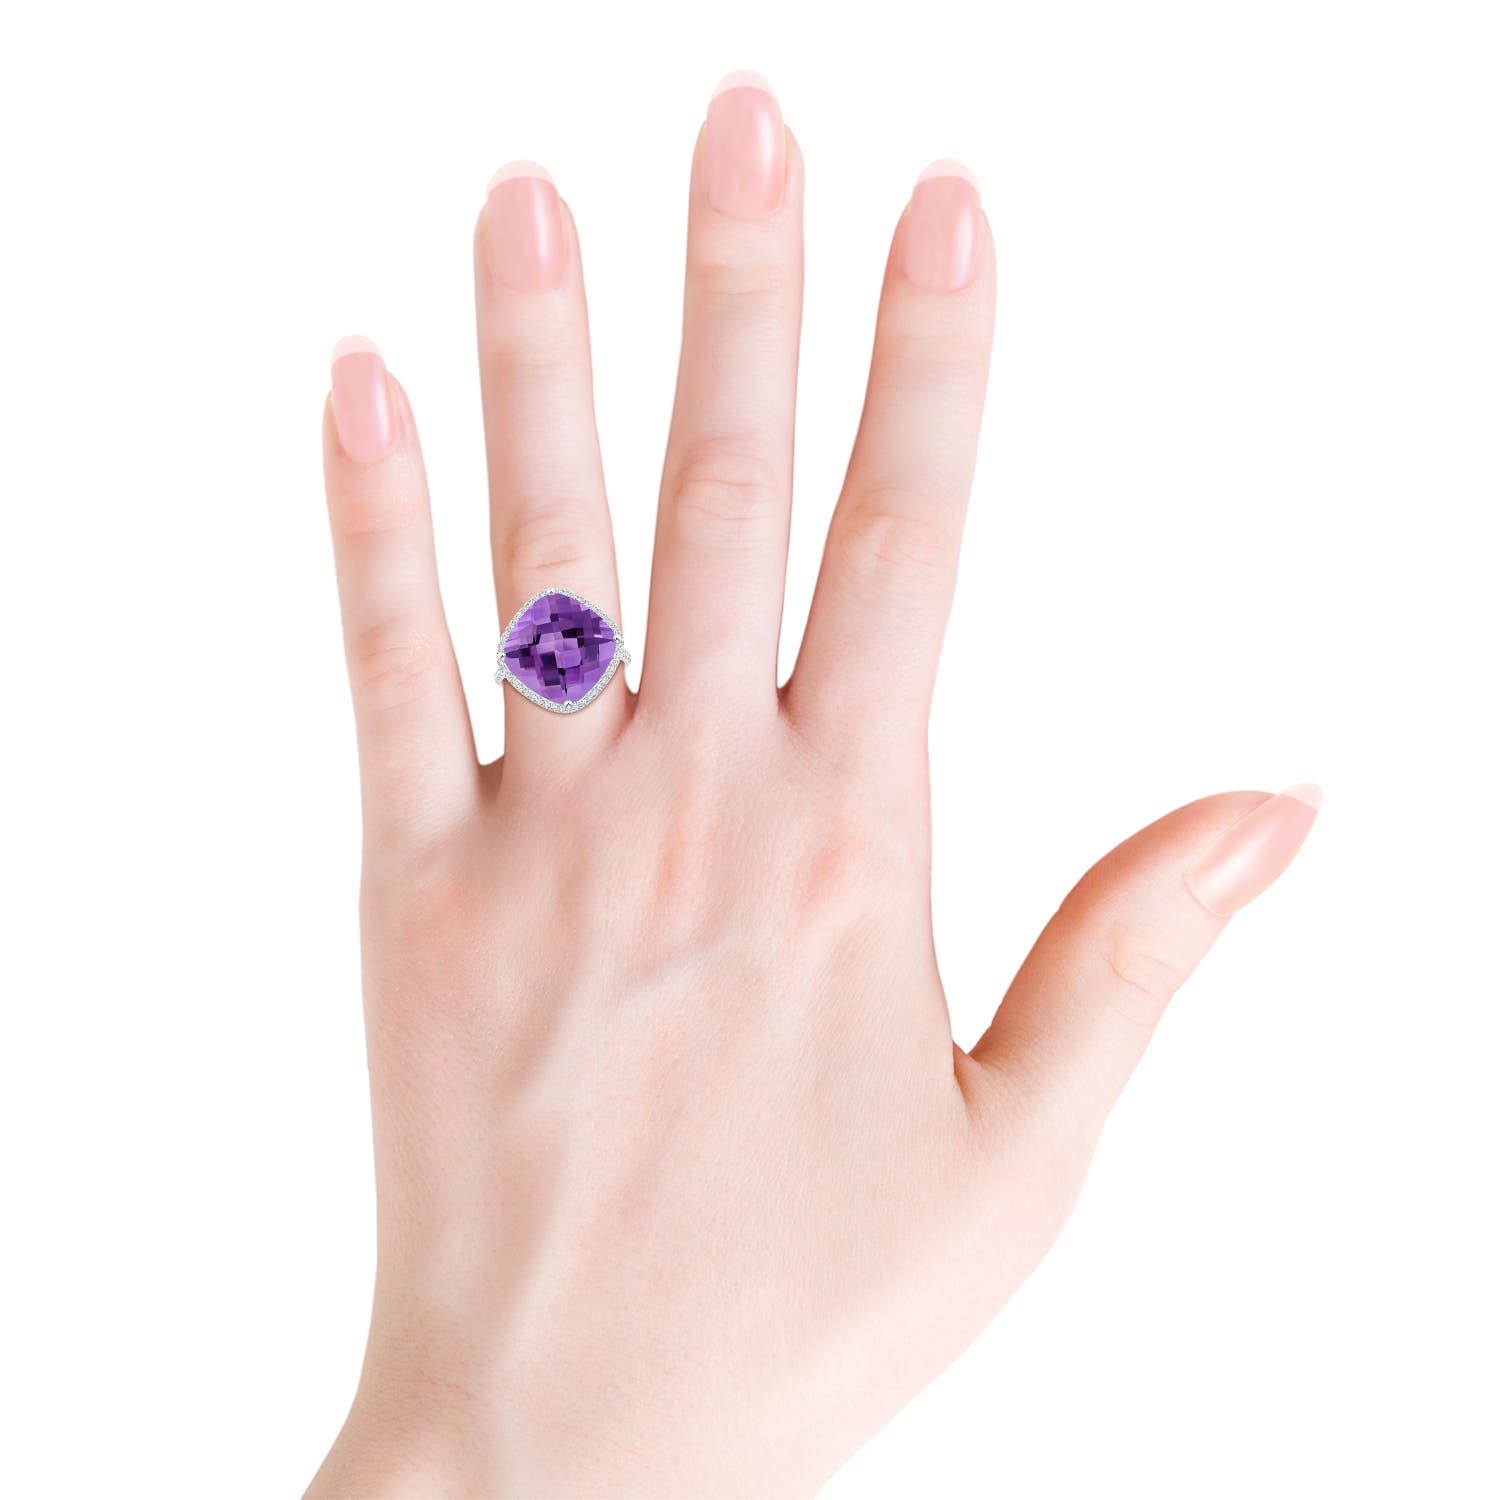 AA - Amethyst / 8.32 CT / 14 KT White Gold